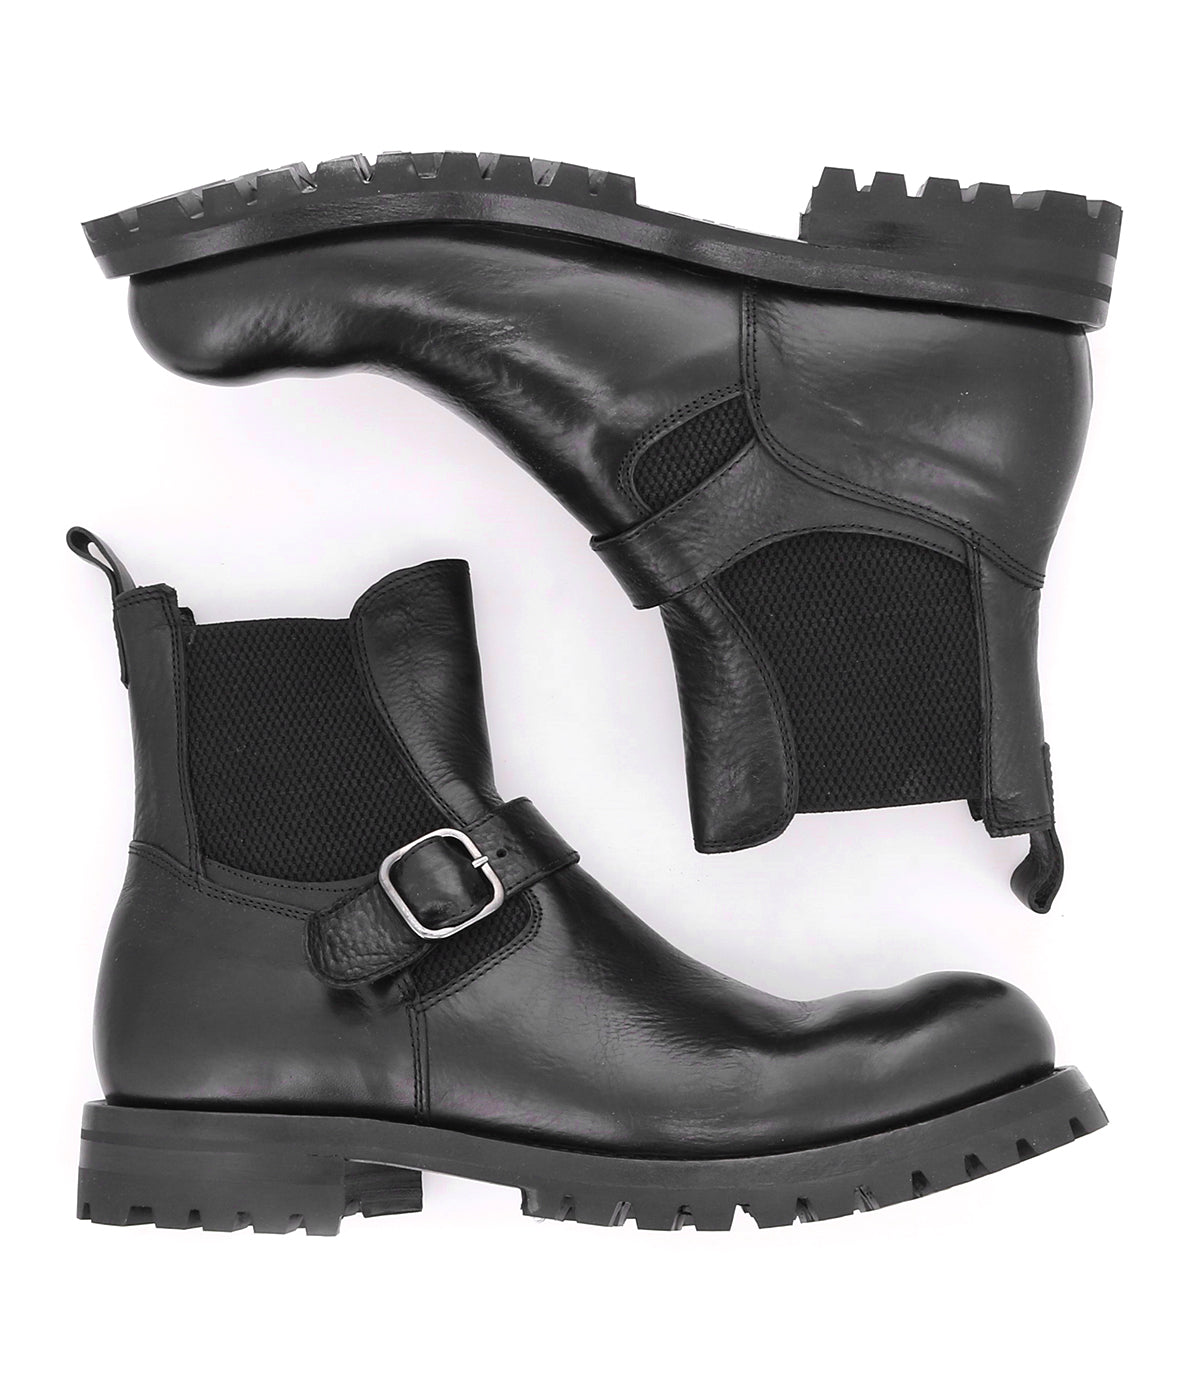 A pair of sleek black leather Bed Stu Chelsea boots with buckles.